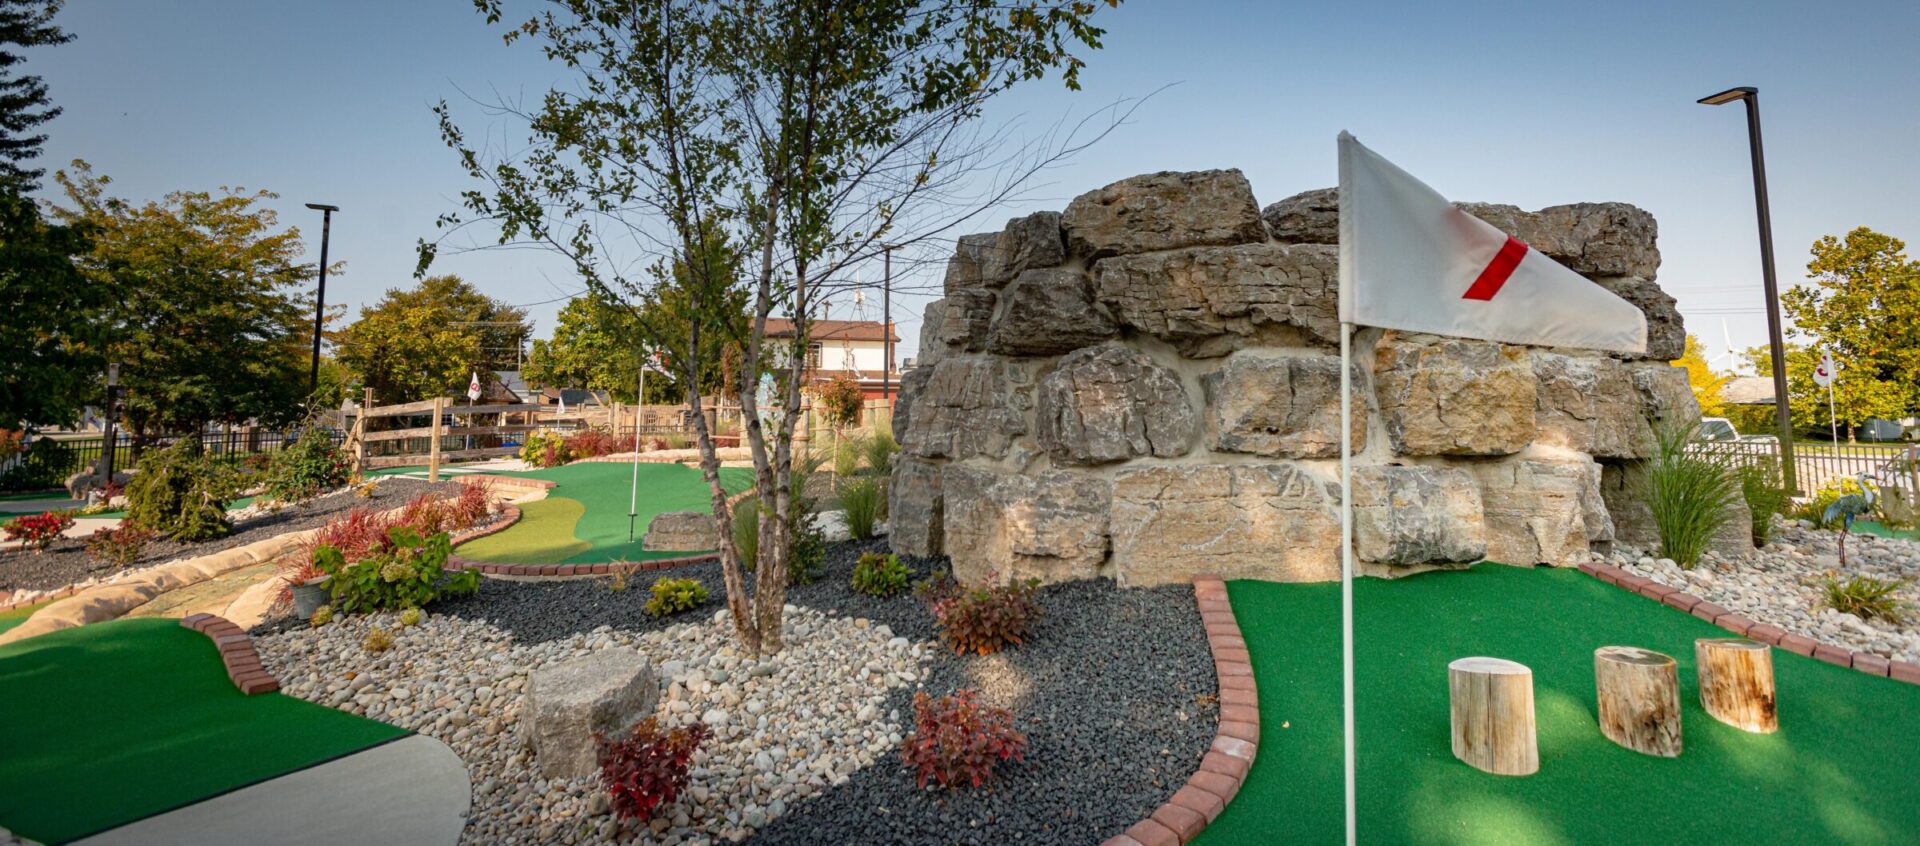 A mini-golf course with green artificial turf, a flag on a hole, decorative rocks, and landscaping under a clear blue sky.